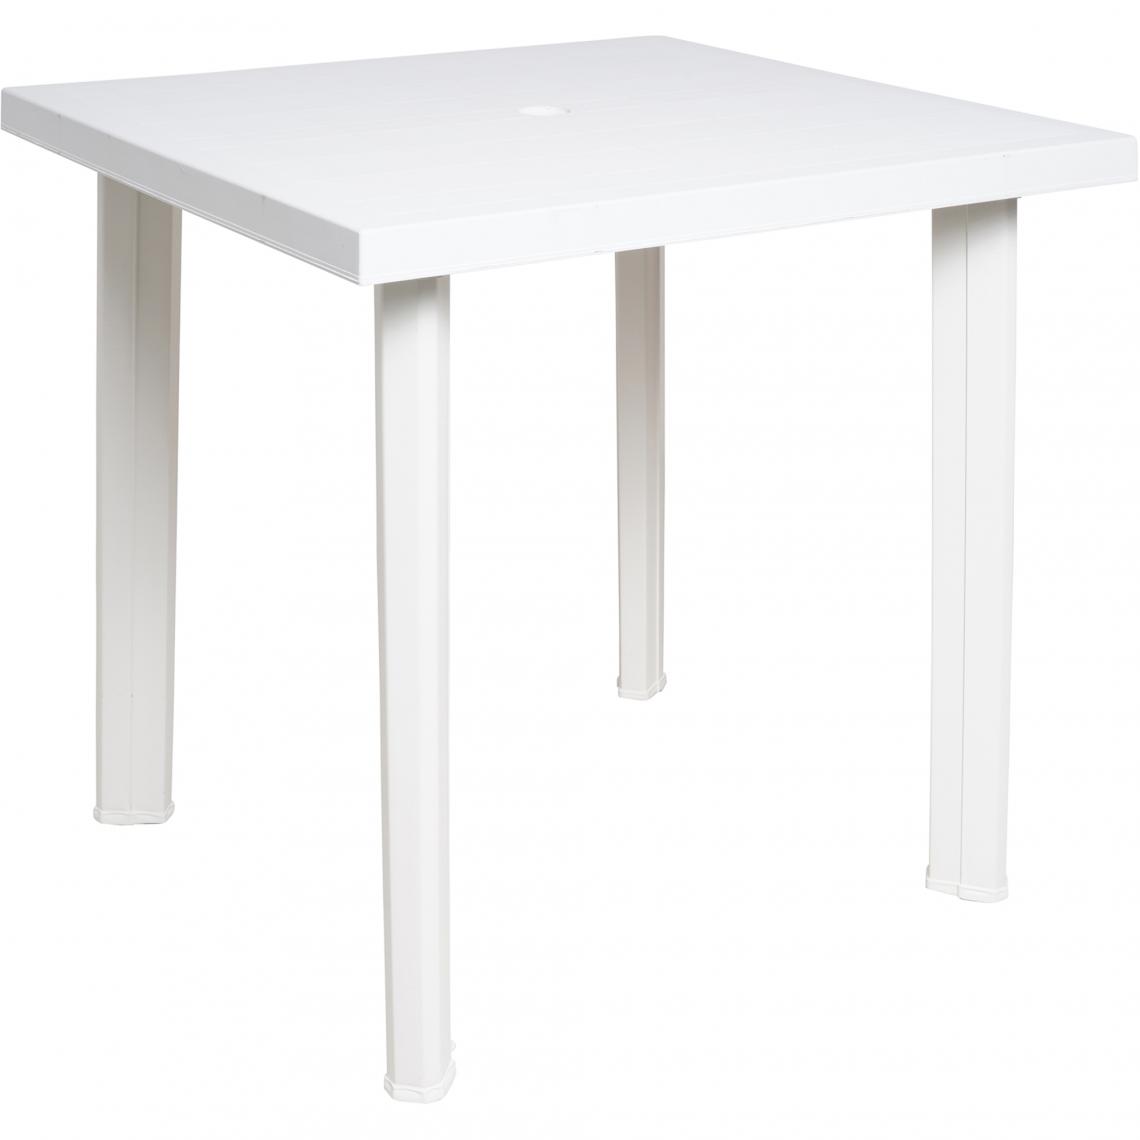 Alter - Table rectangulaire modulable, Made in Italy, 80 x 75 x 72 cm, couleur Blanc - Tables à manger